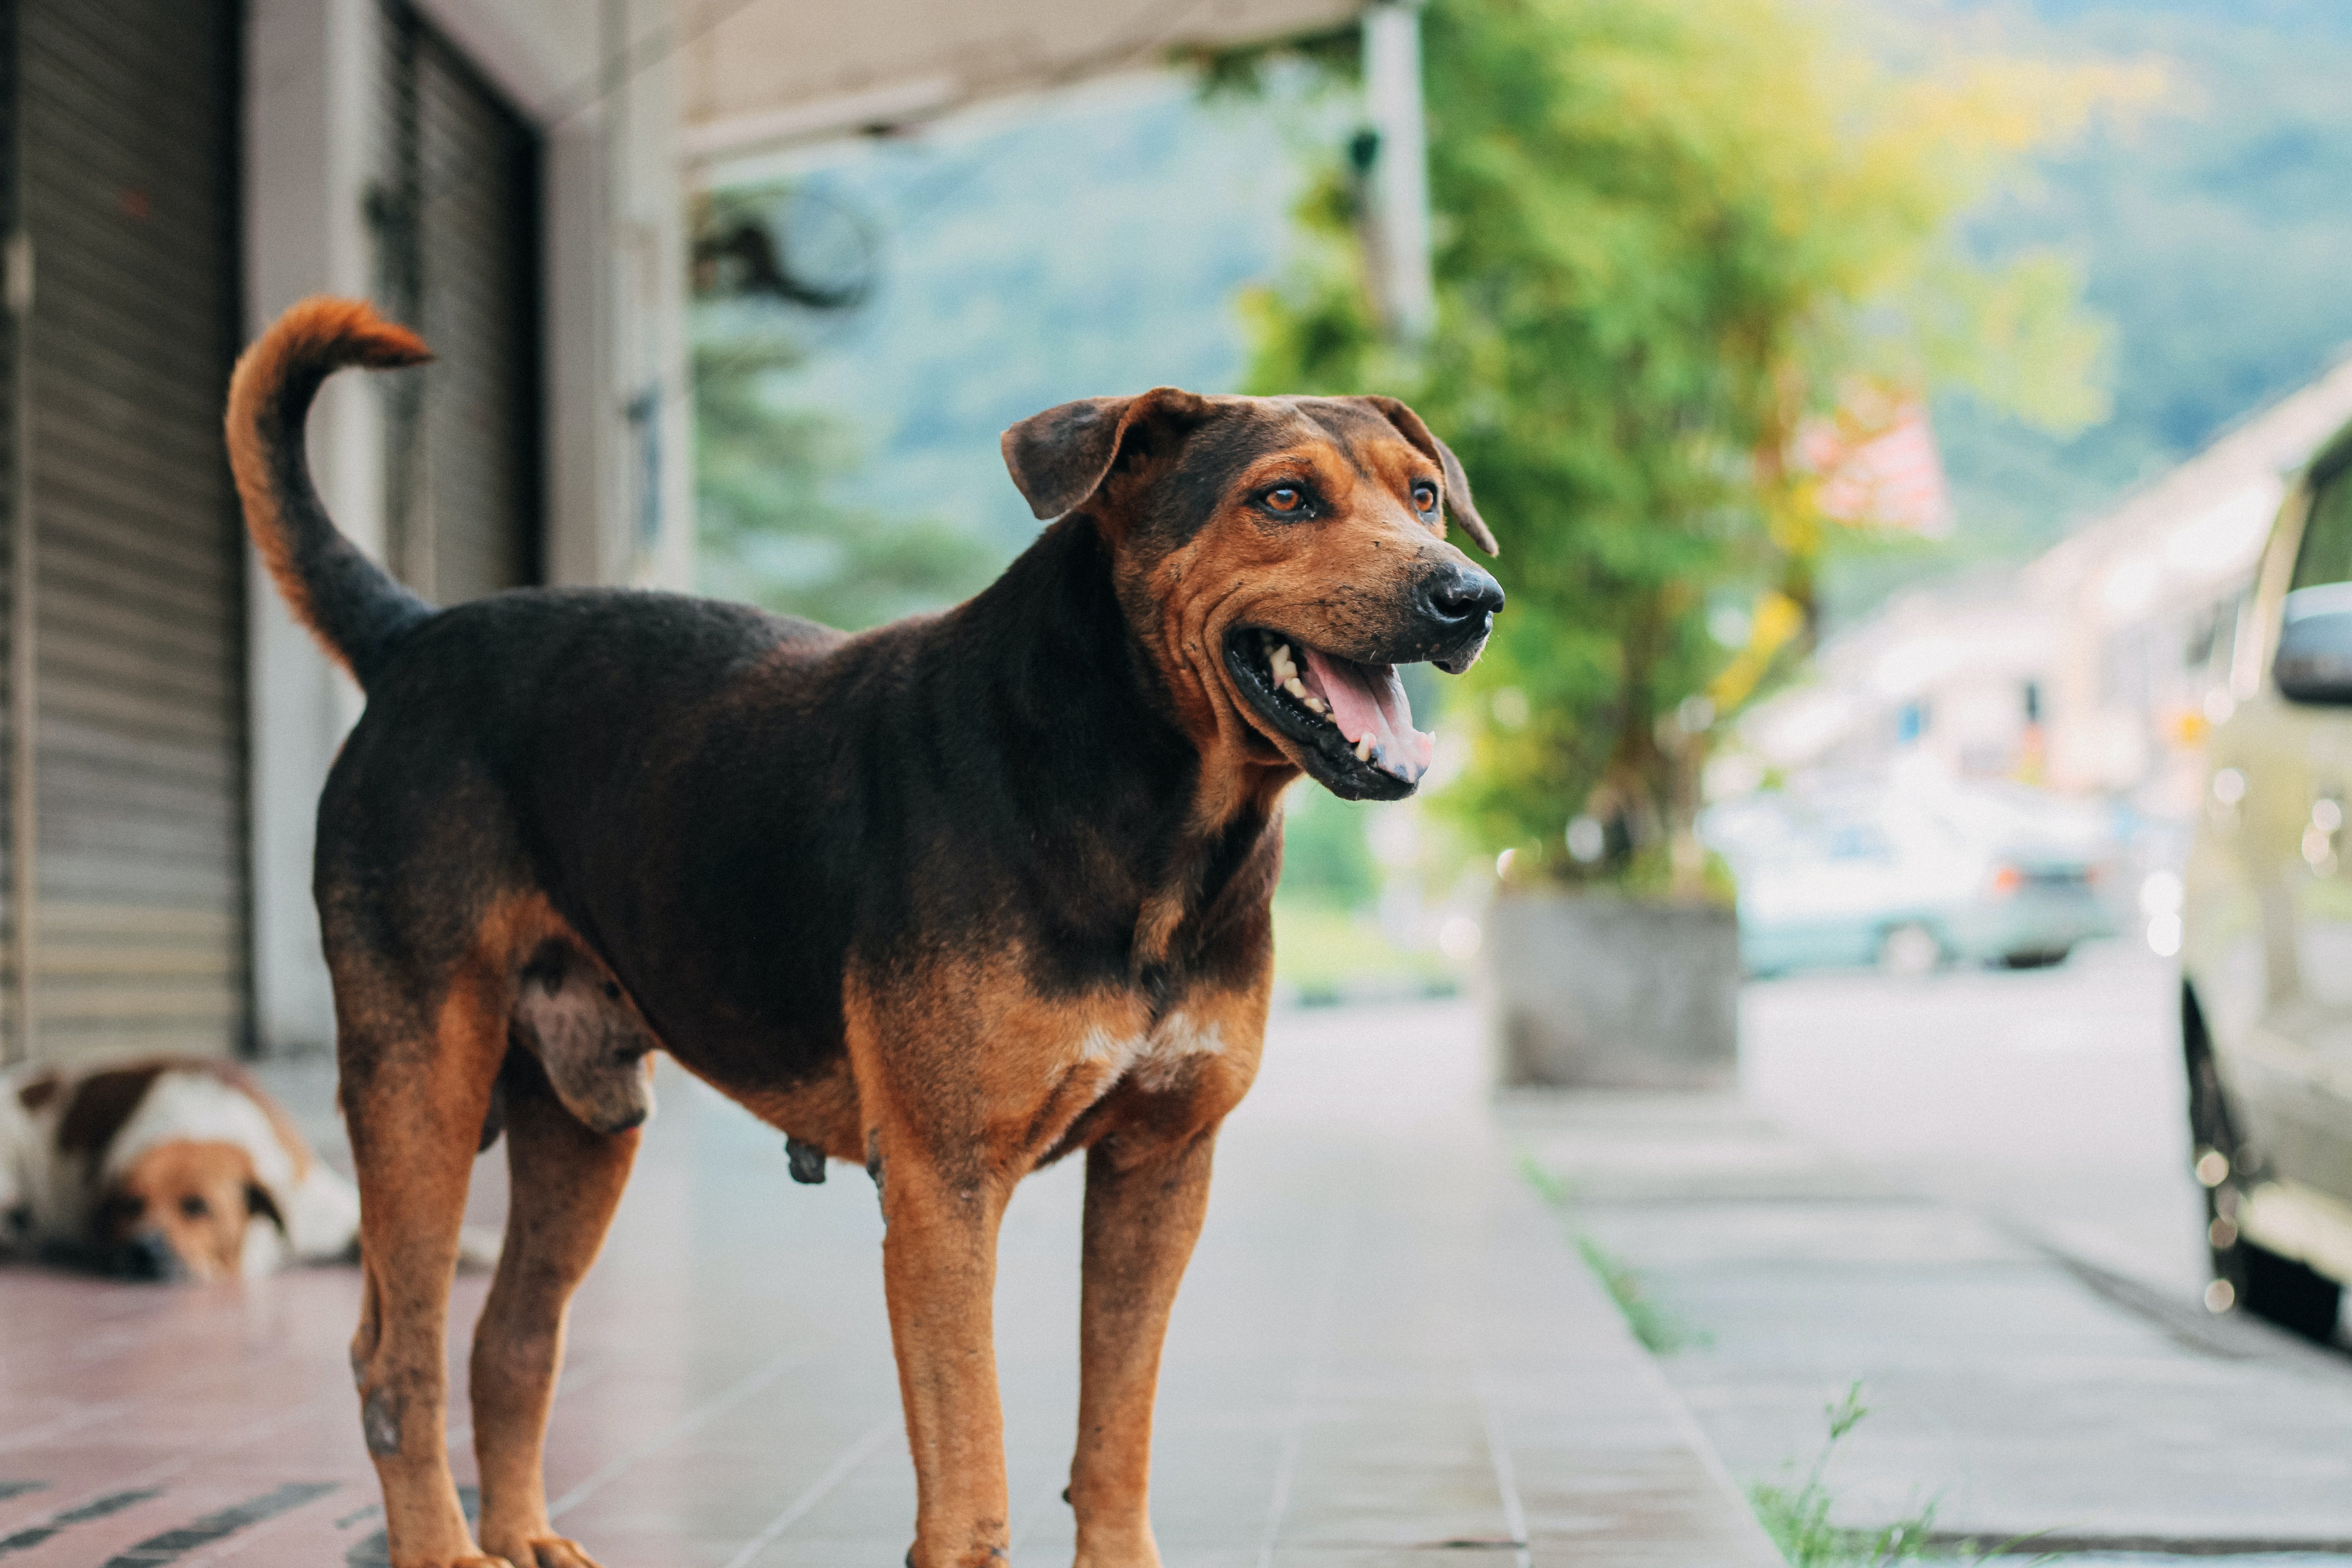 Rocky waited for Andrew to come so he could take him to George. | Photo: Pexels